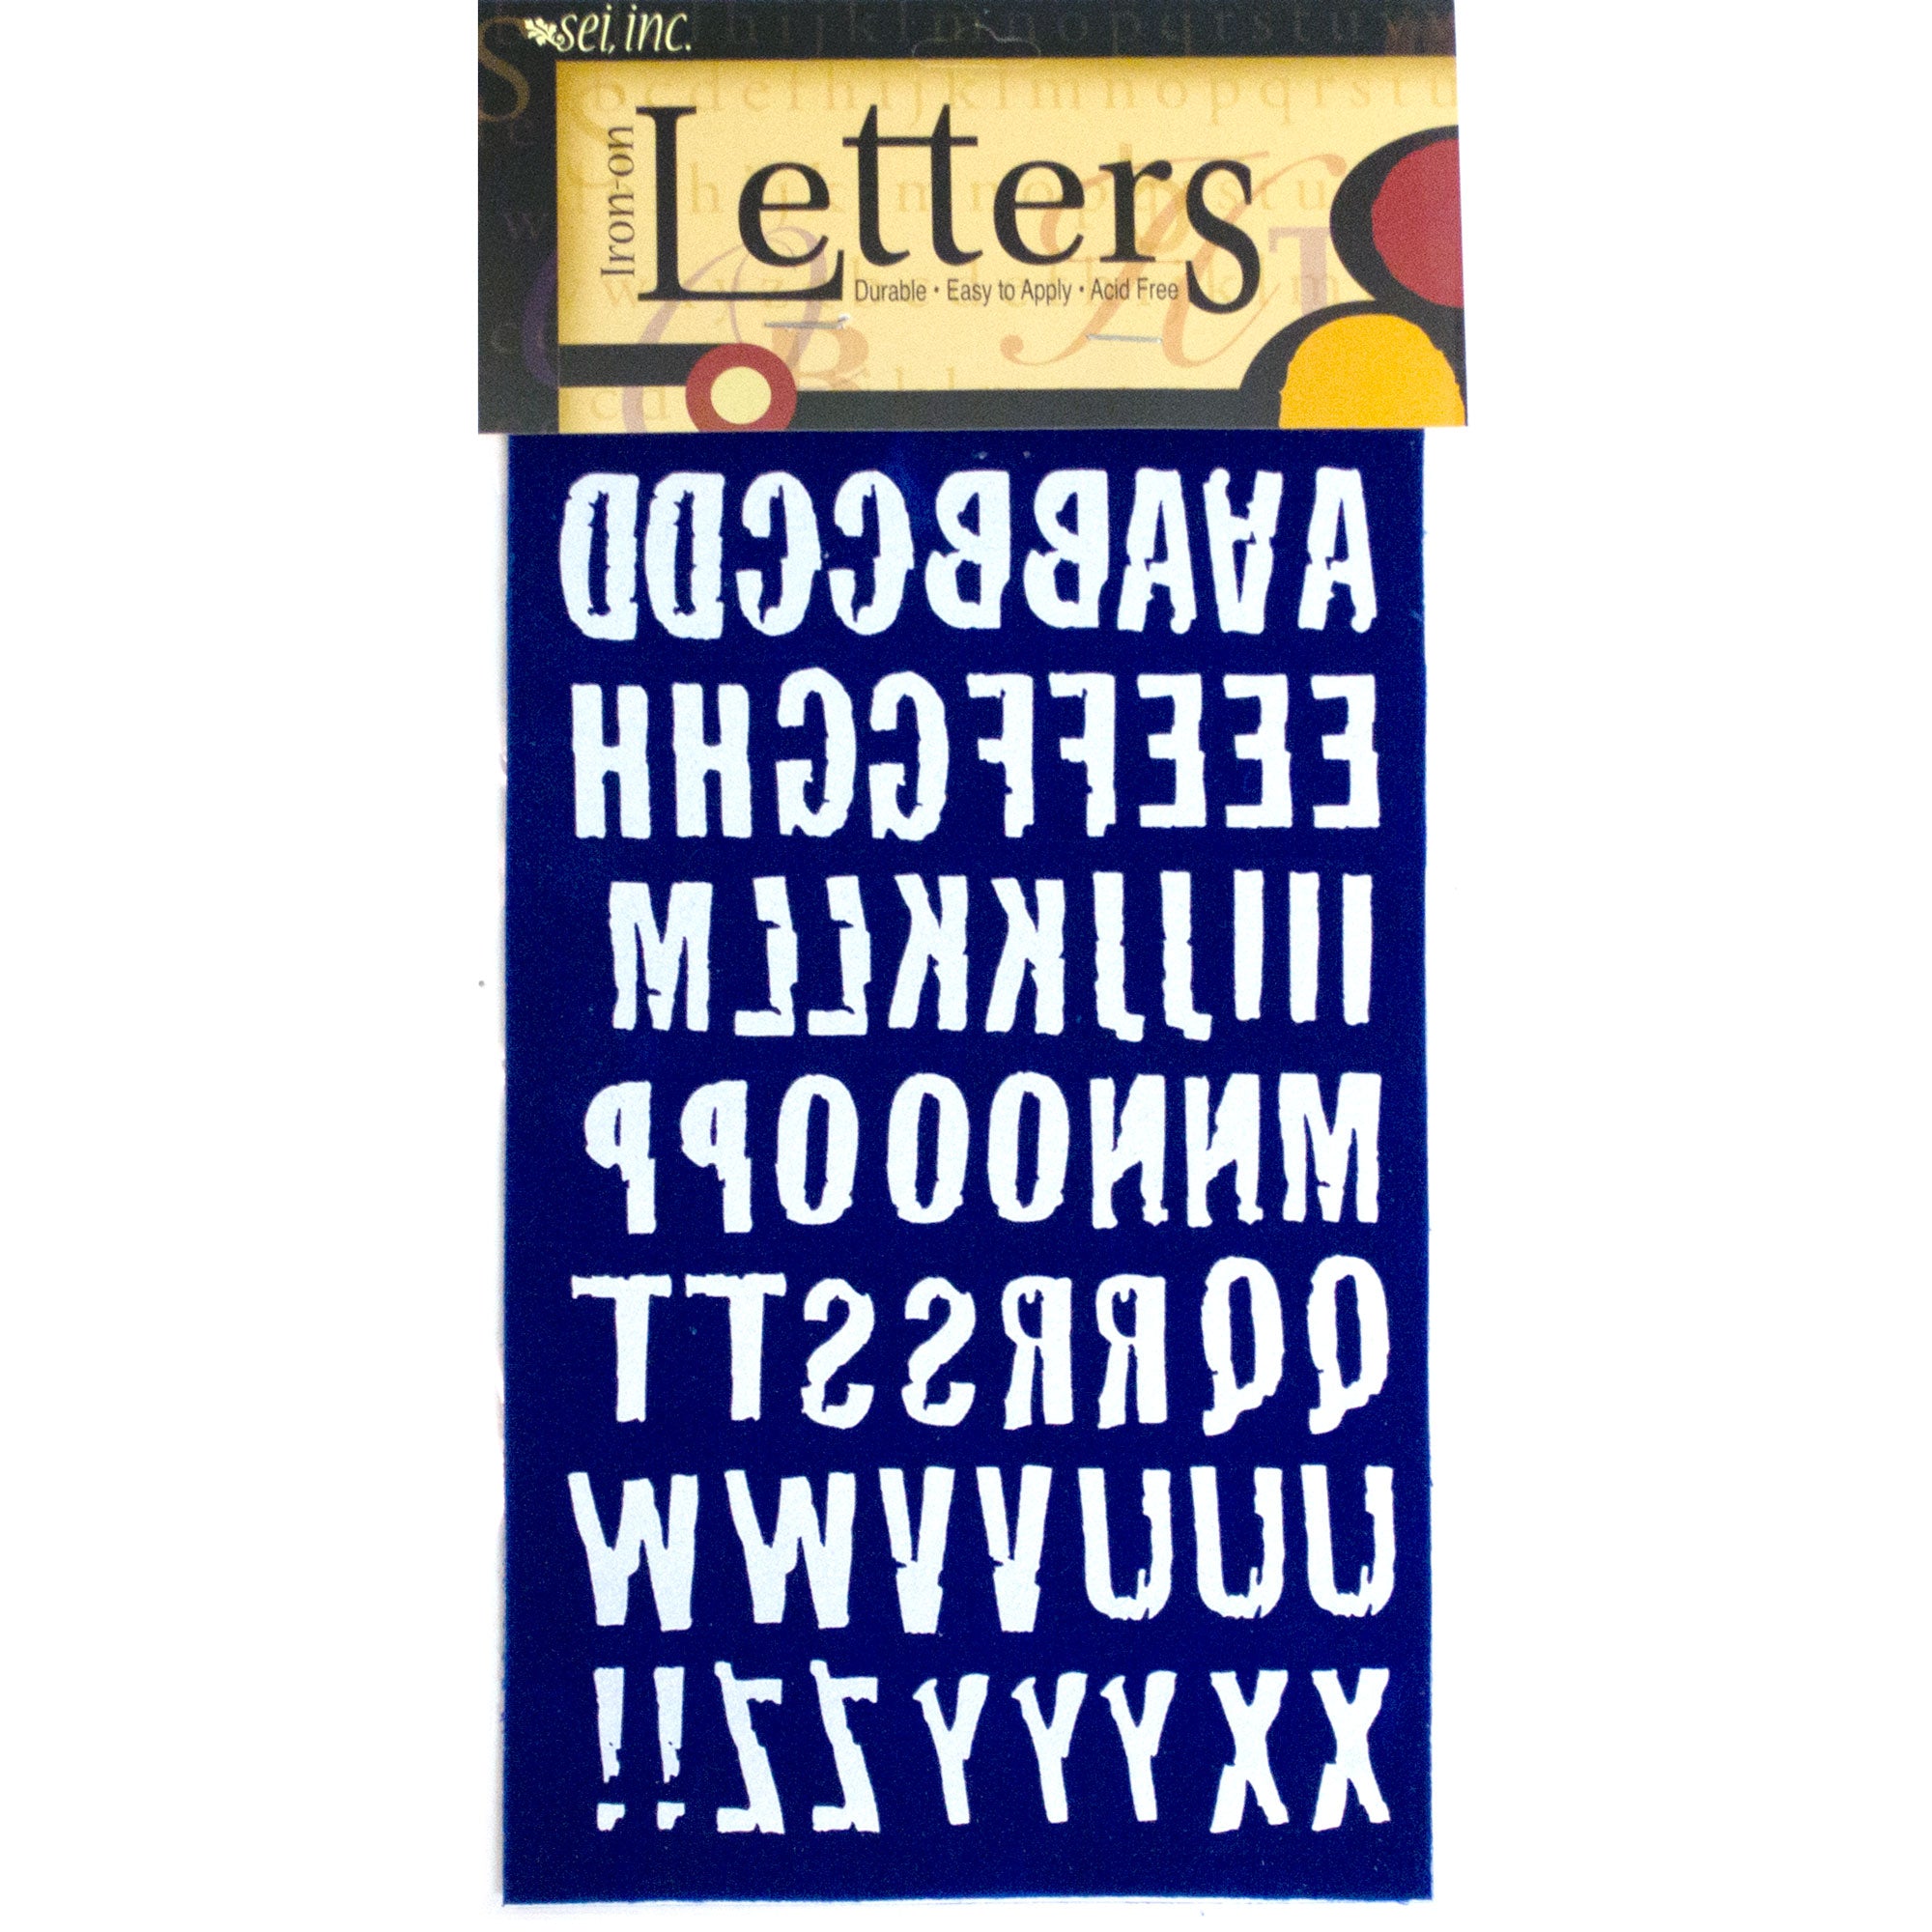 Wholesale SUPERFINDINGS 32sheet 8 Color Colorful Alphabet Number